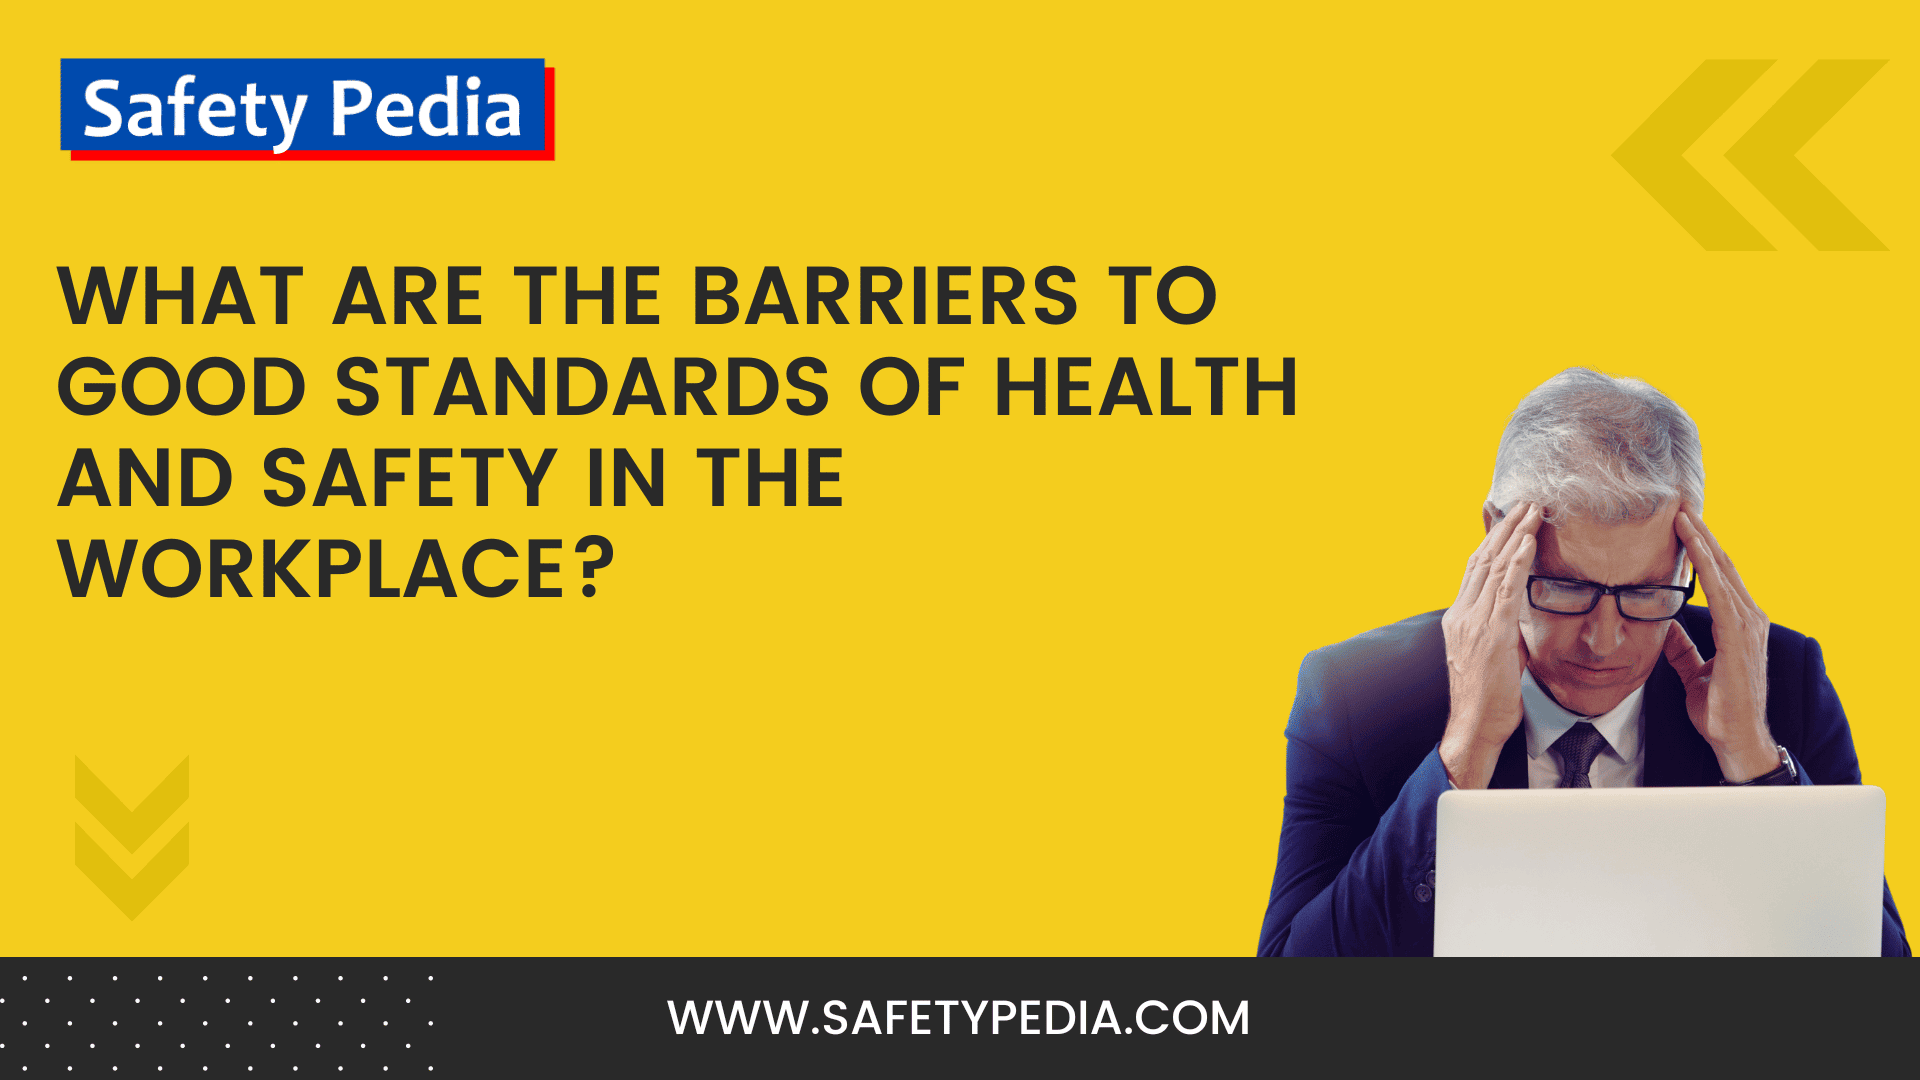 Maintaining good health and safety standards is vital for any organization. It is necessary to ensure the well-being and protection of employees, customers, and the public. However, there are often barriers that can hinder the achievement of these standards. This article will explore the common barriers to achieving good health and safety standards in the workplace.